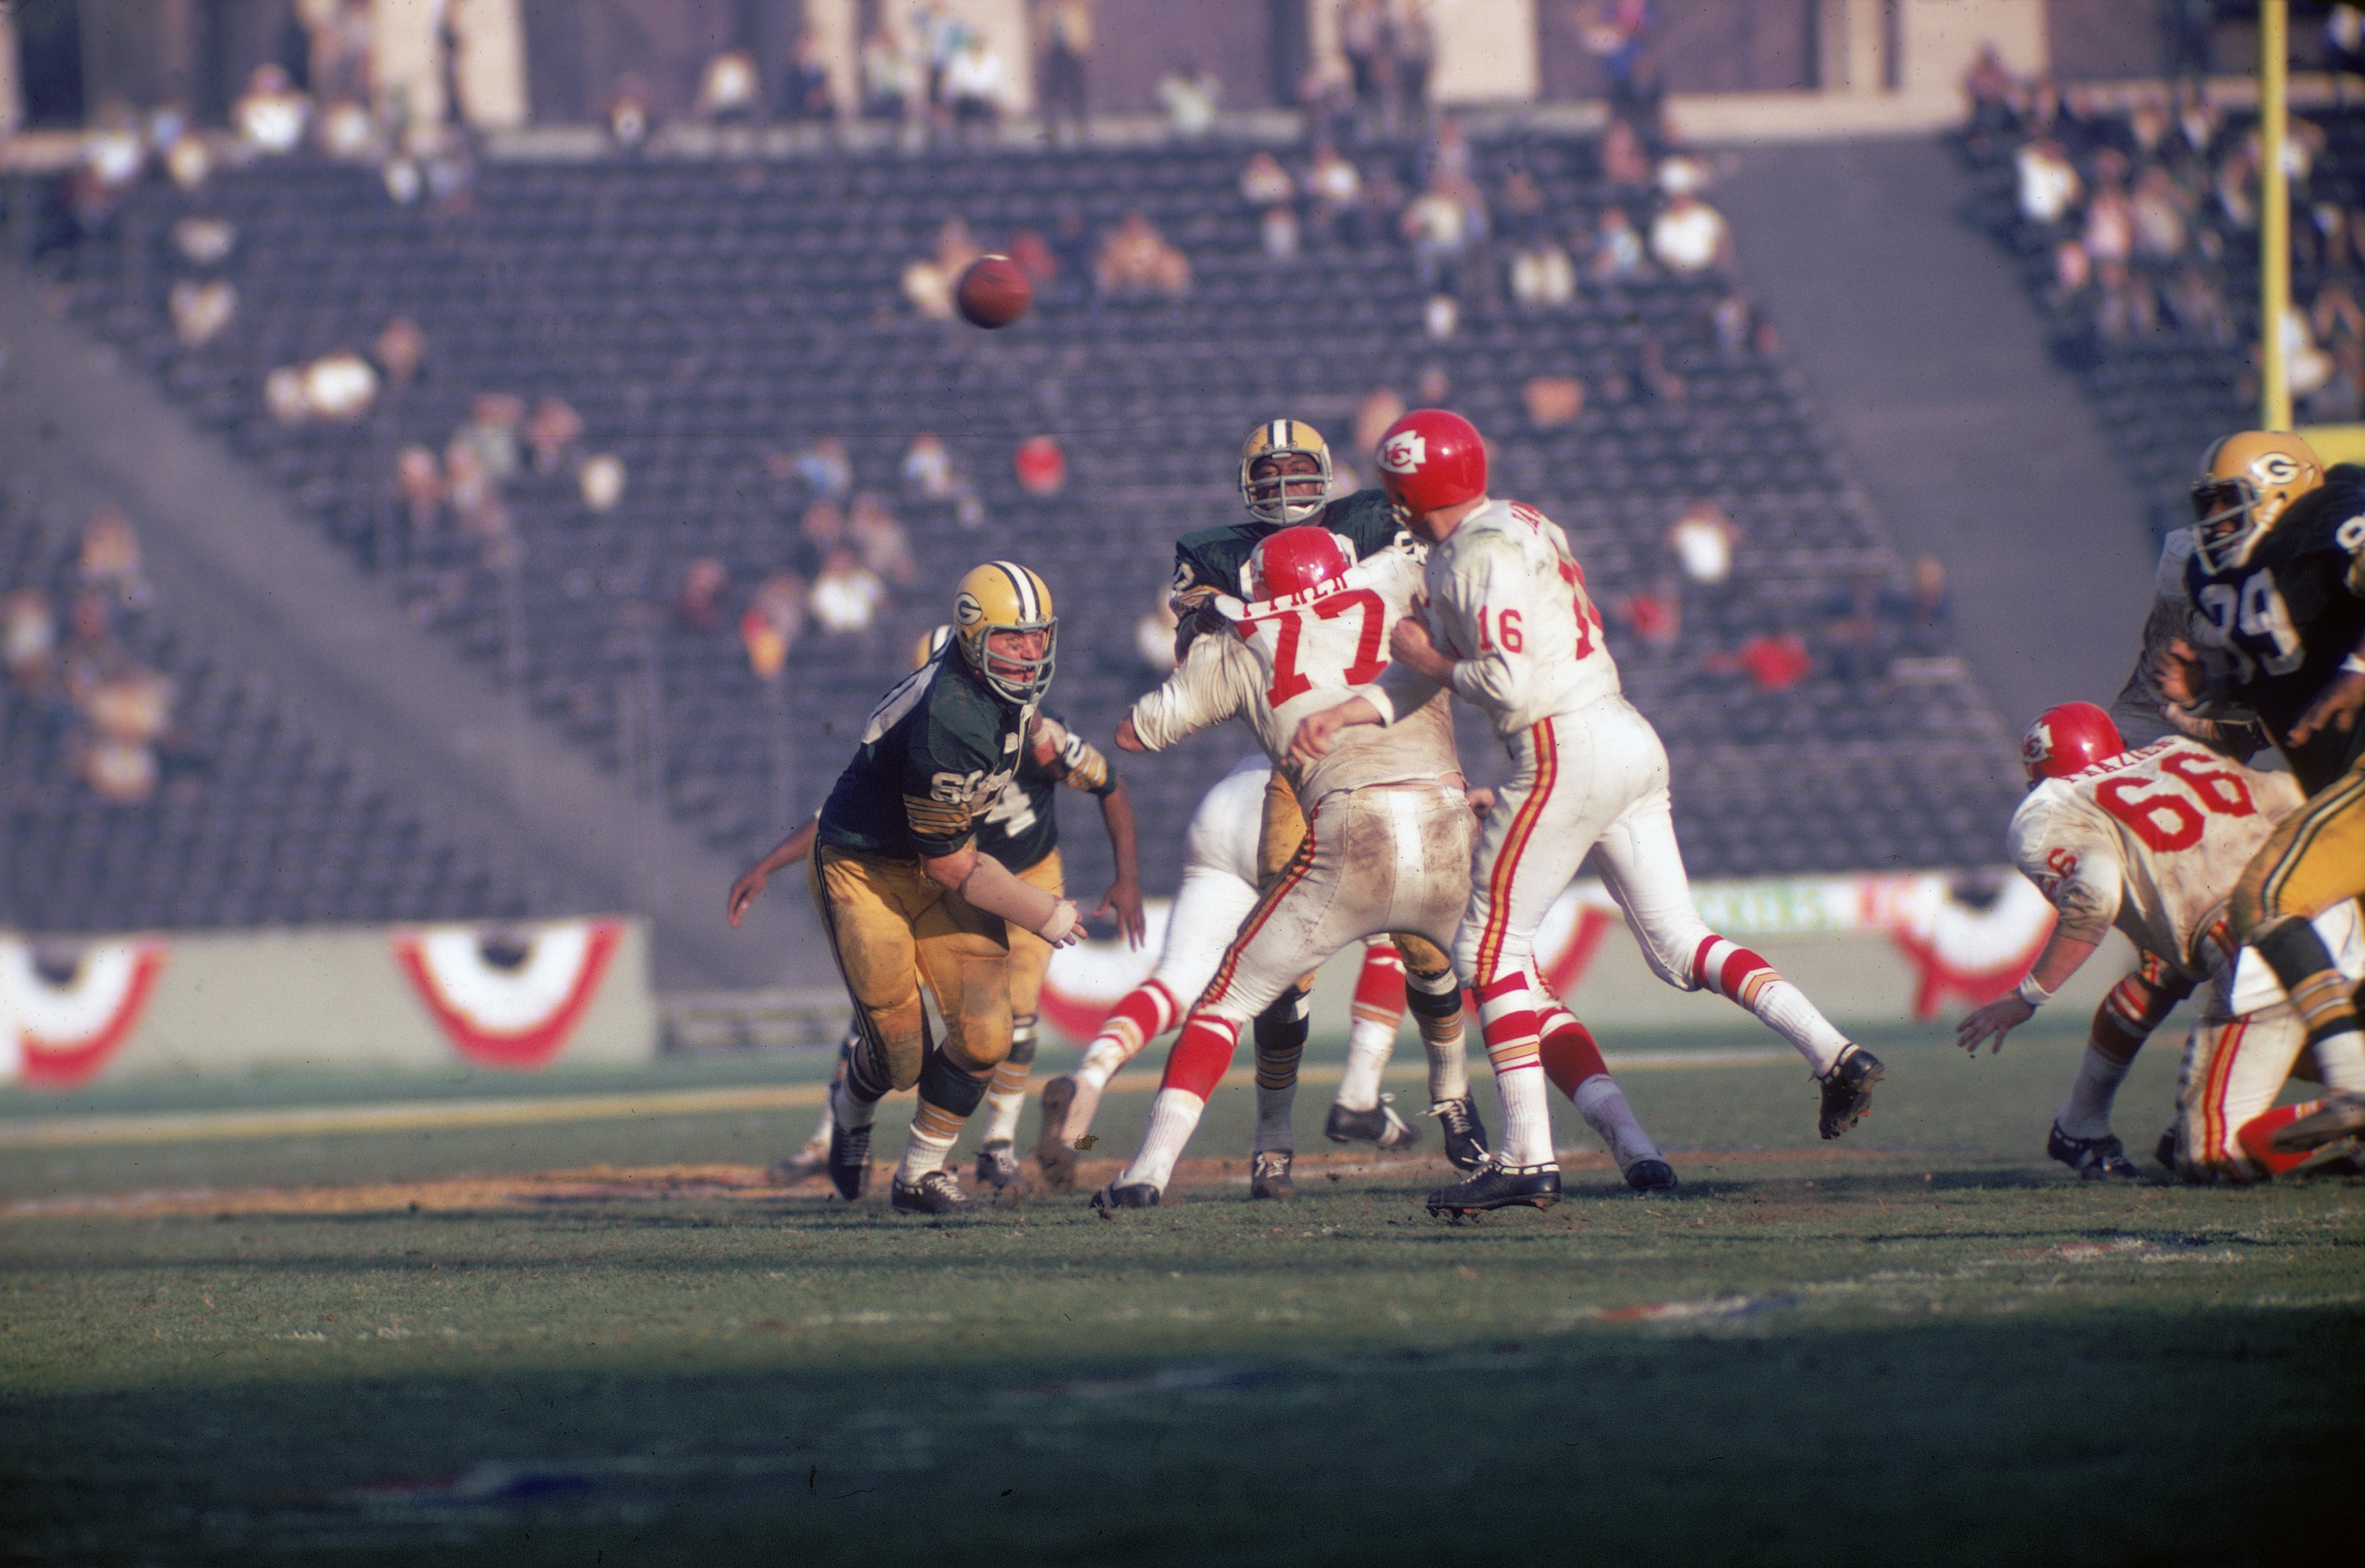 Football player Len Dawson (center, #16 in white), quarterback for the Kansas City Chiefs, throws the ball as opponent Lee Roy Coffey (left, #80) closes in during the Super Bowl, Los Angeles, California, January 15, 1967 | Photo: Getty Images